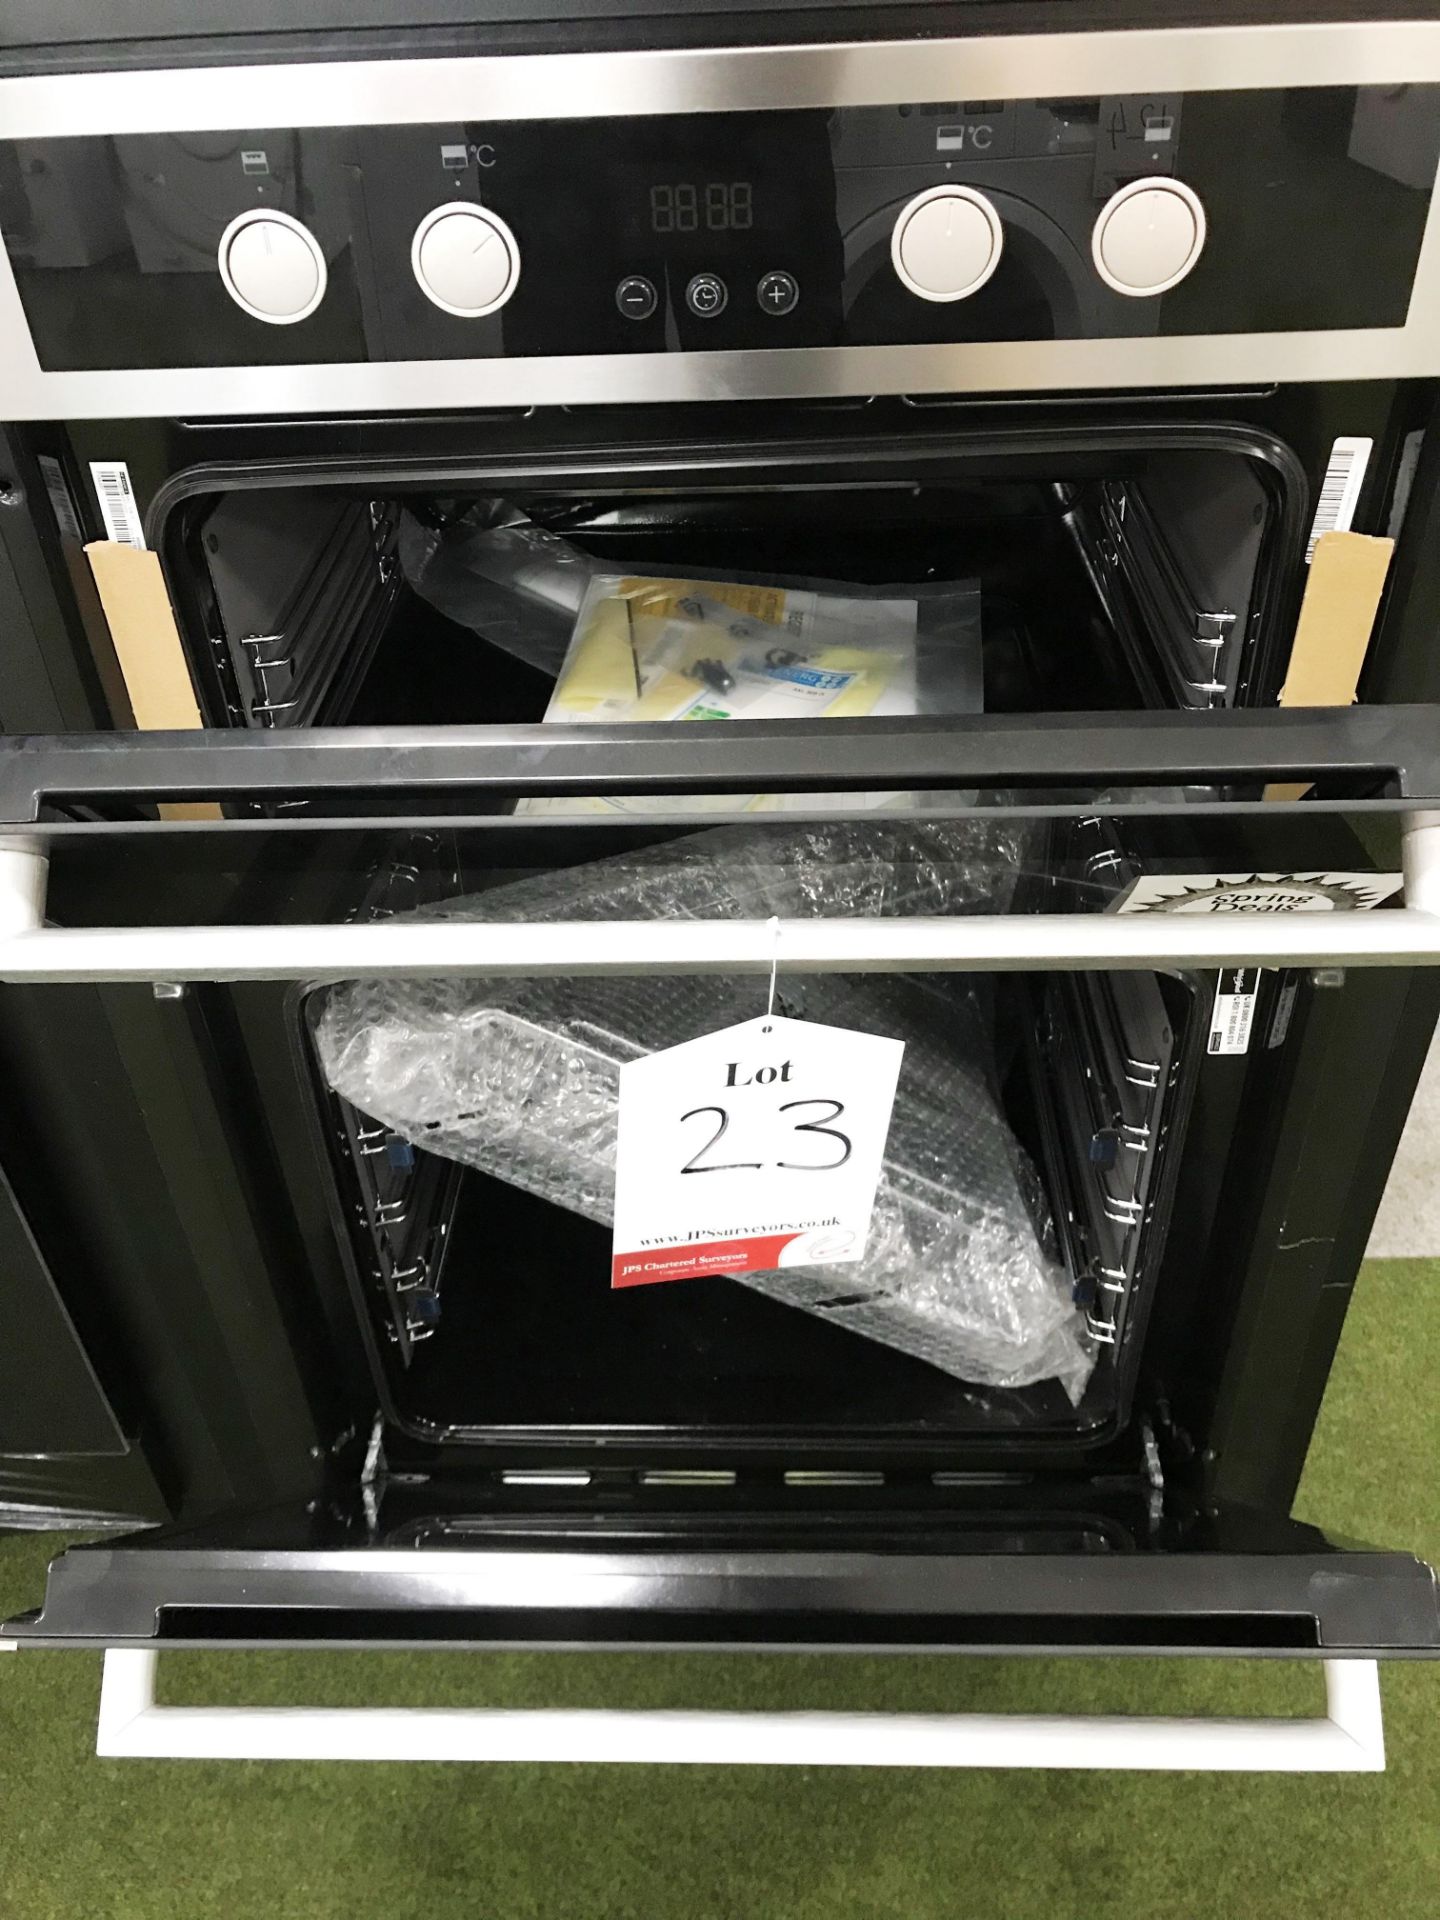 Ex Display Whirlpool AKL309IX Built In Double Oven - Stainless Steel - RRP£529 - Image 3 of 3